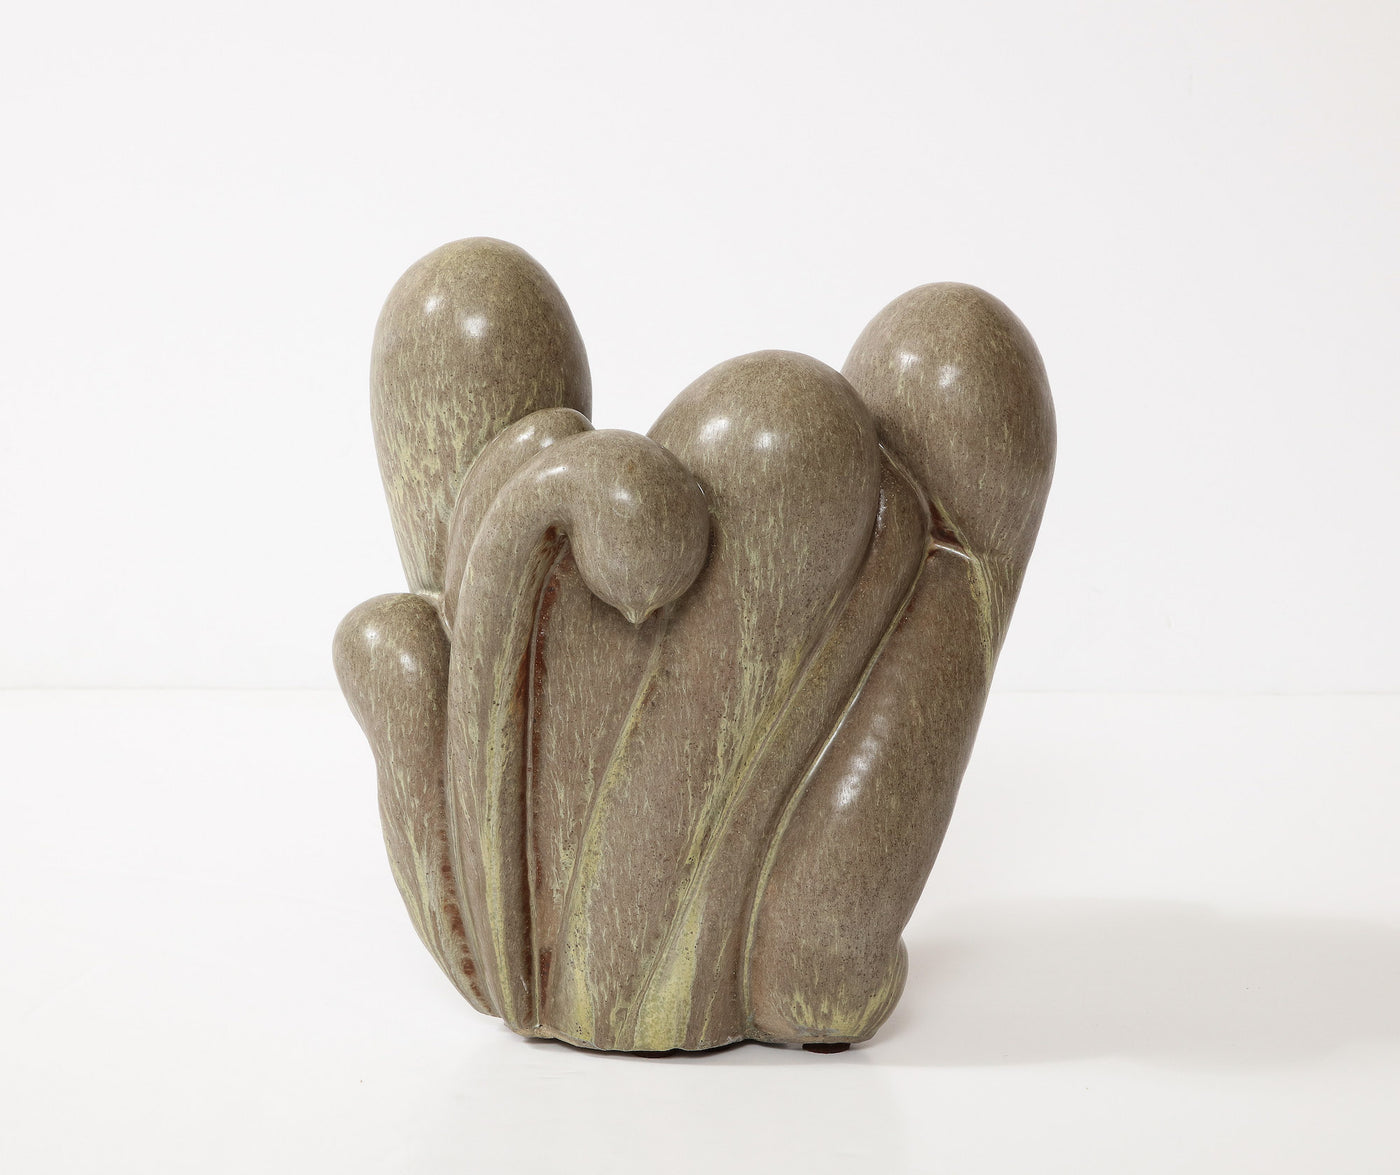 Untitled Sculpture #12 by Rosanne Sniderman